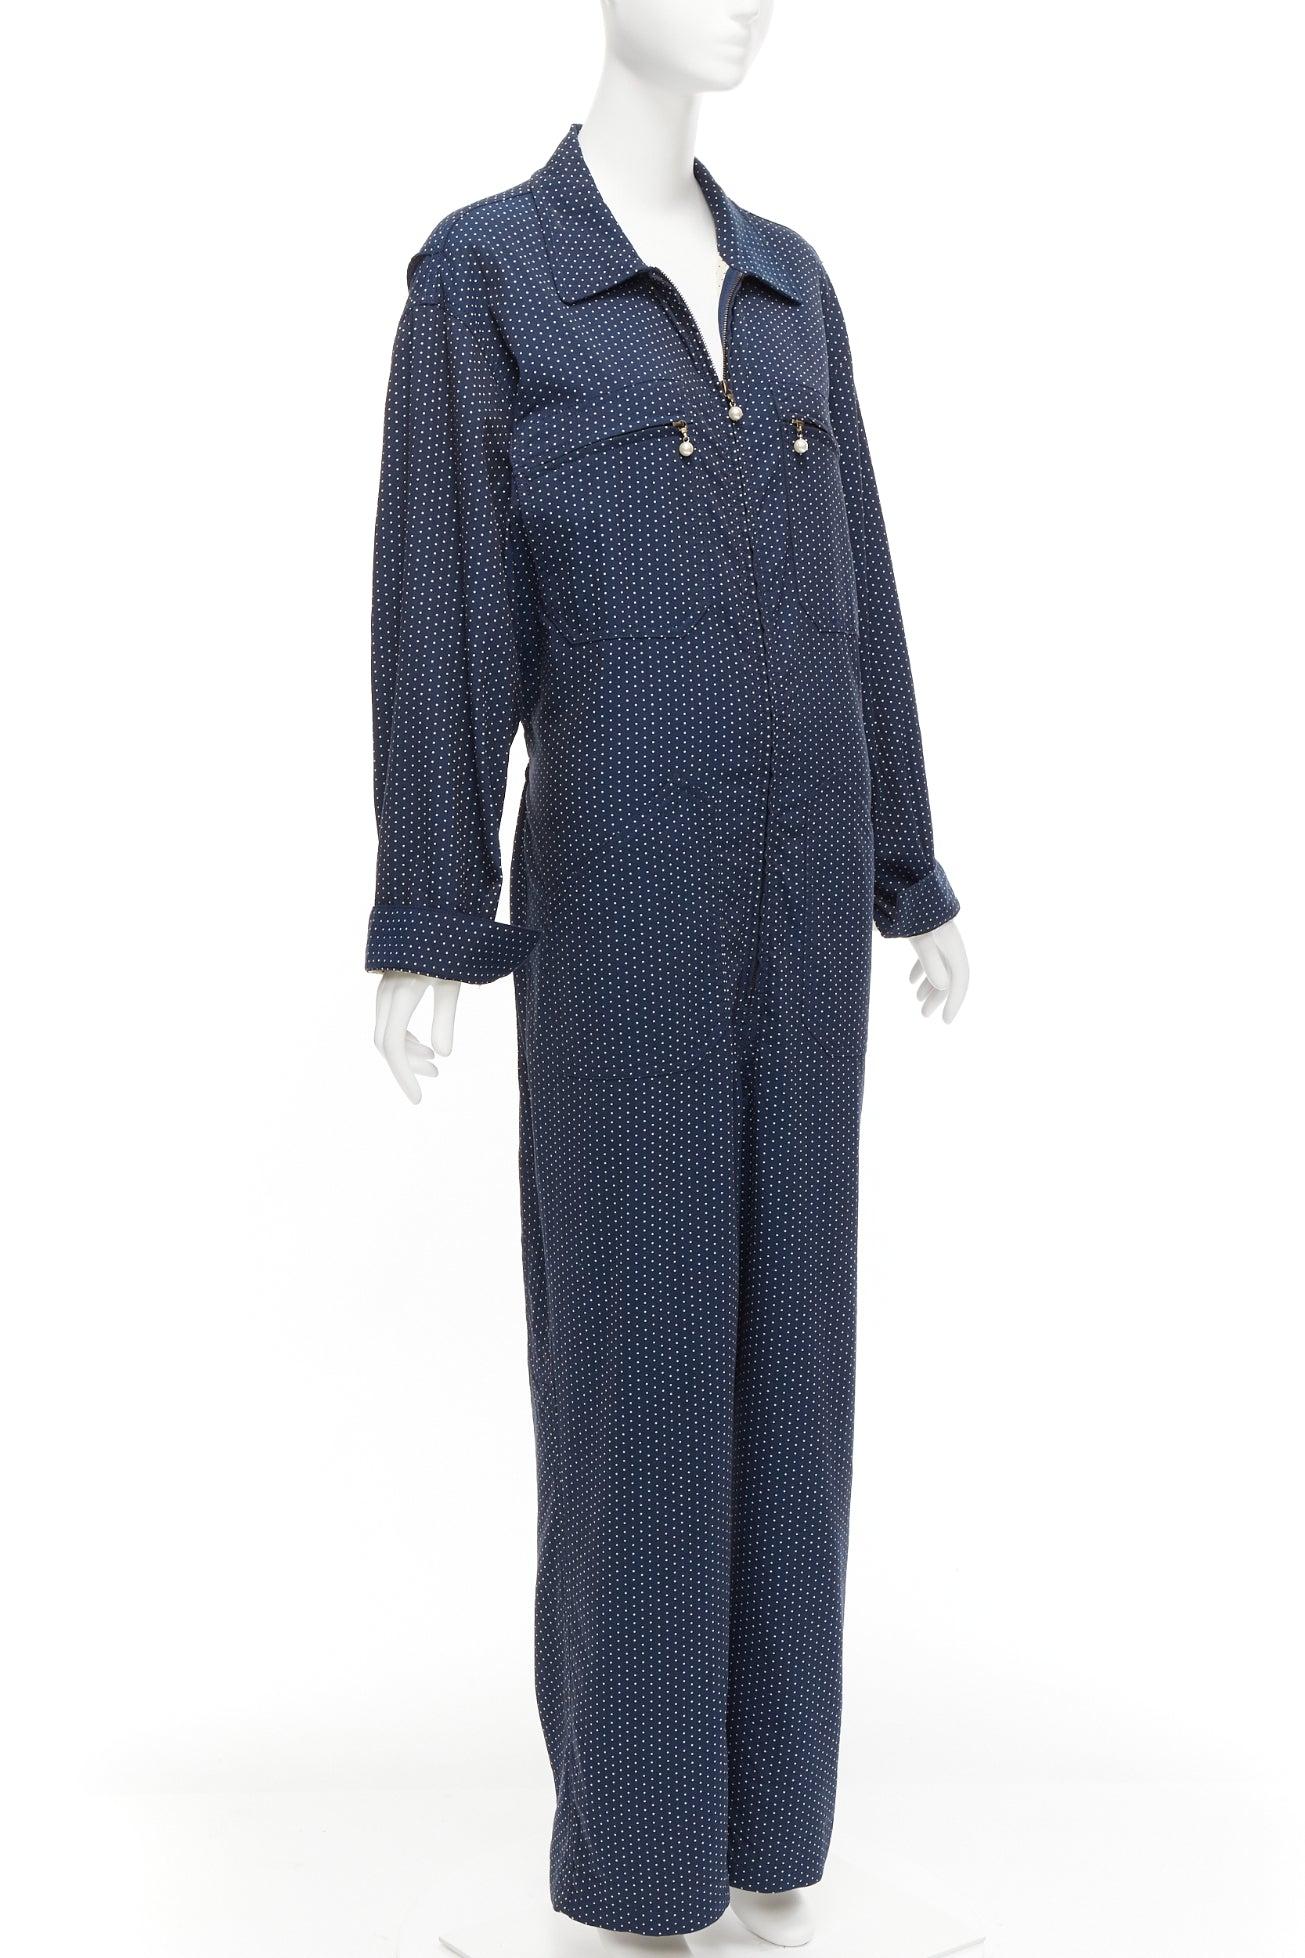 ROSIE ASSOULIN navy white polka dot pearl zip big pockets wide boiler jumpsuit S
Reference: NKLL/A00037
Brand: Rosie Assoulin
Material: Cotton, Blend
Color: Navy, White
Pattern: Polka Dot
Closure: Zip
Extra Details: Front zip. Elasticated waist at